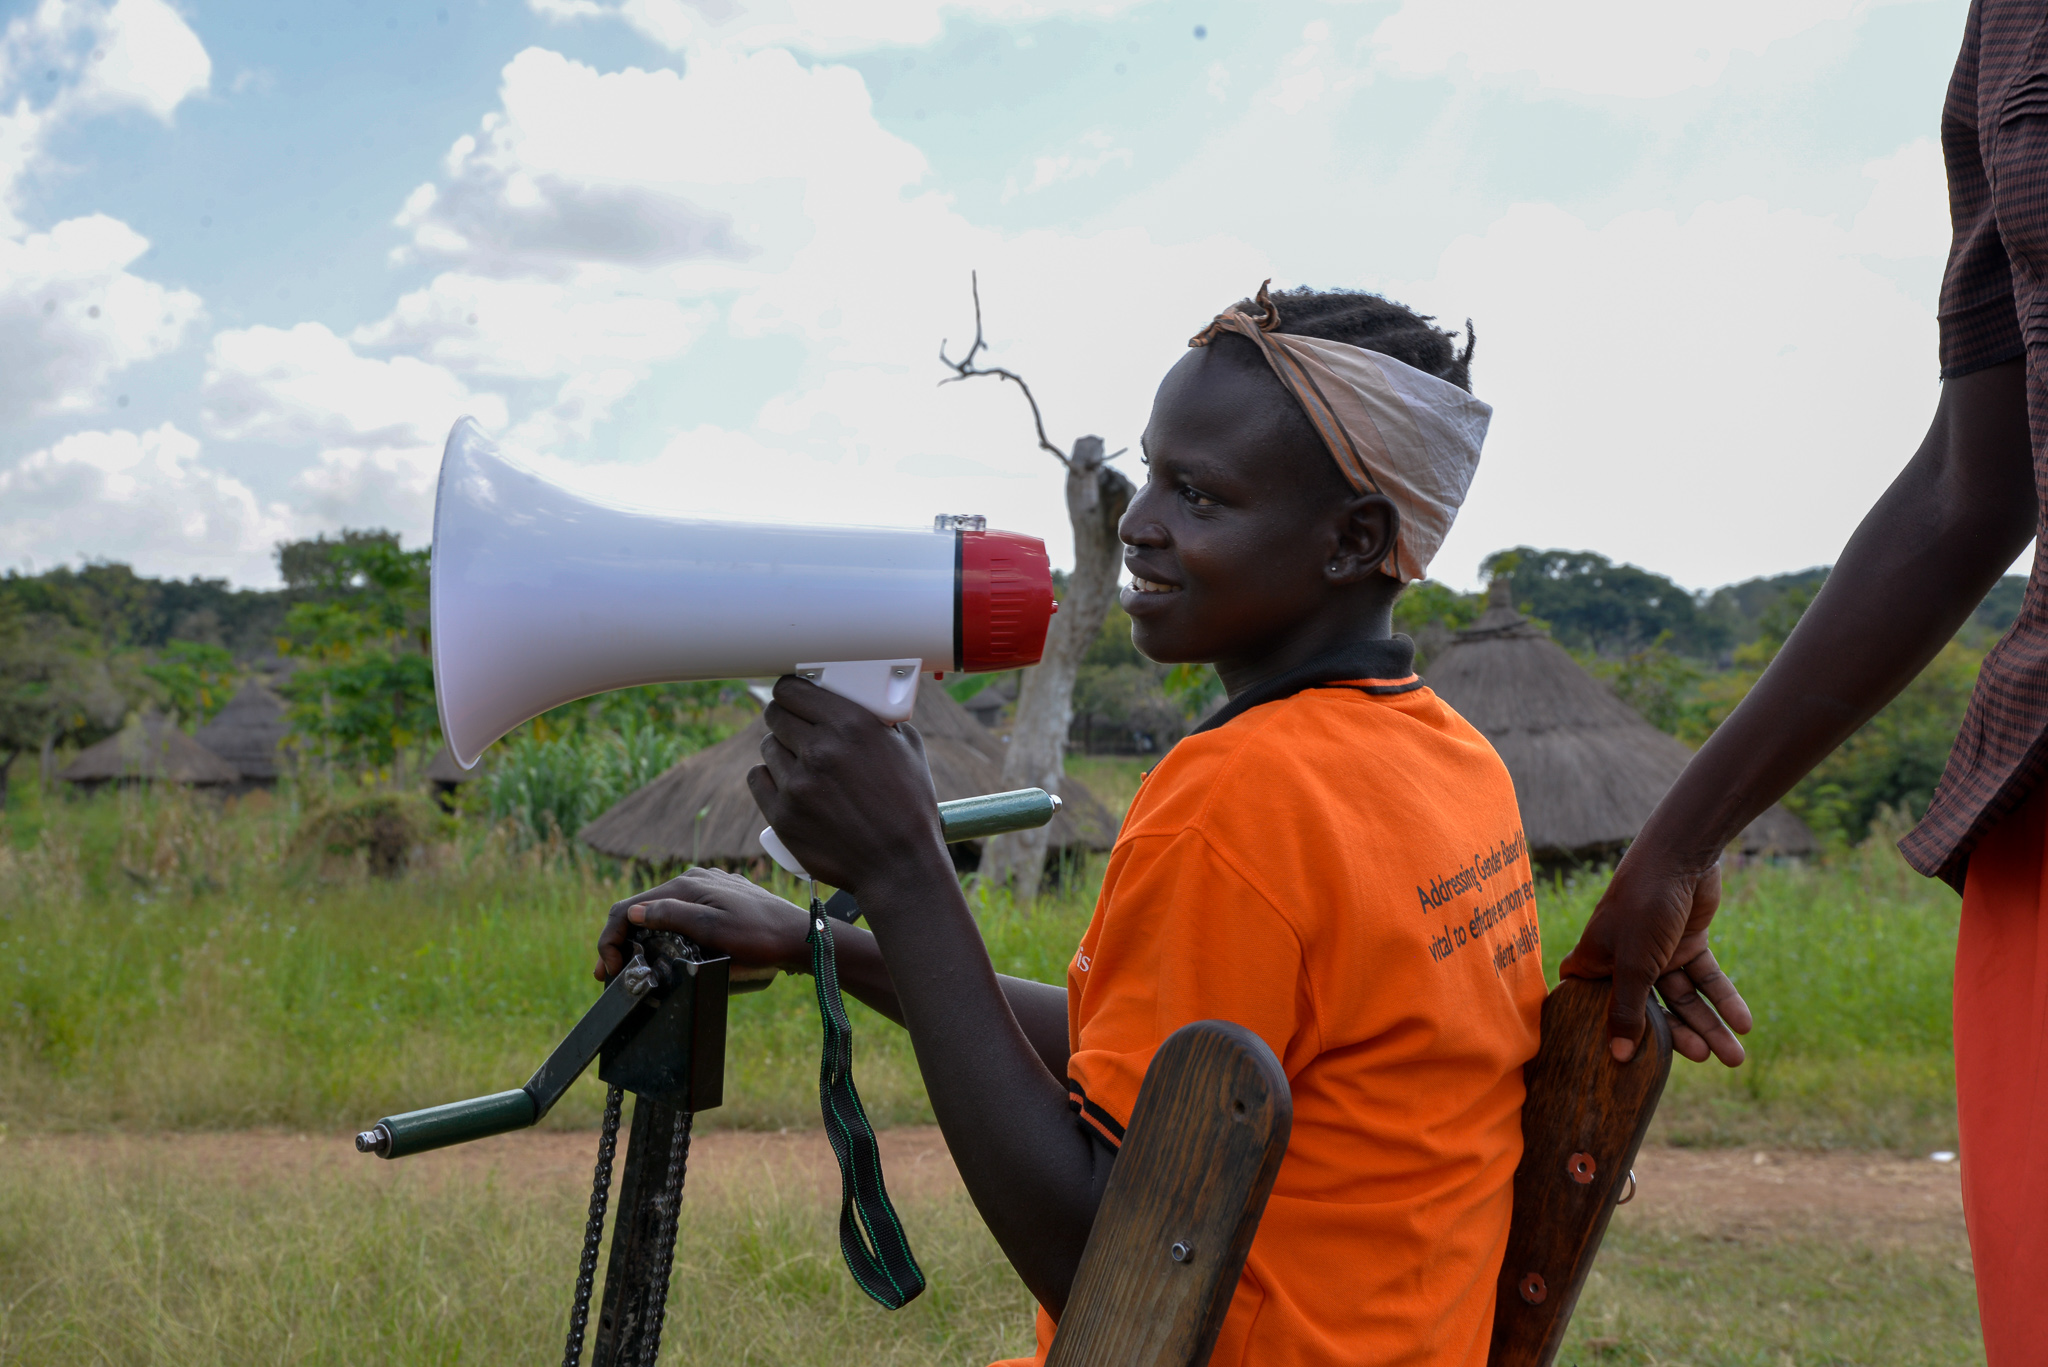 Jane, 14, uses a megaphone to share protection messages with her community